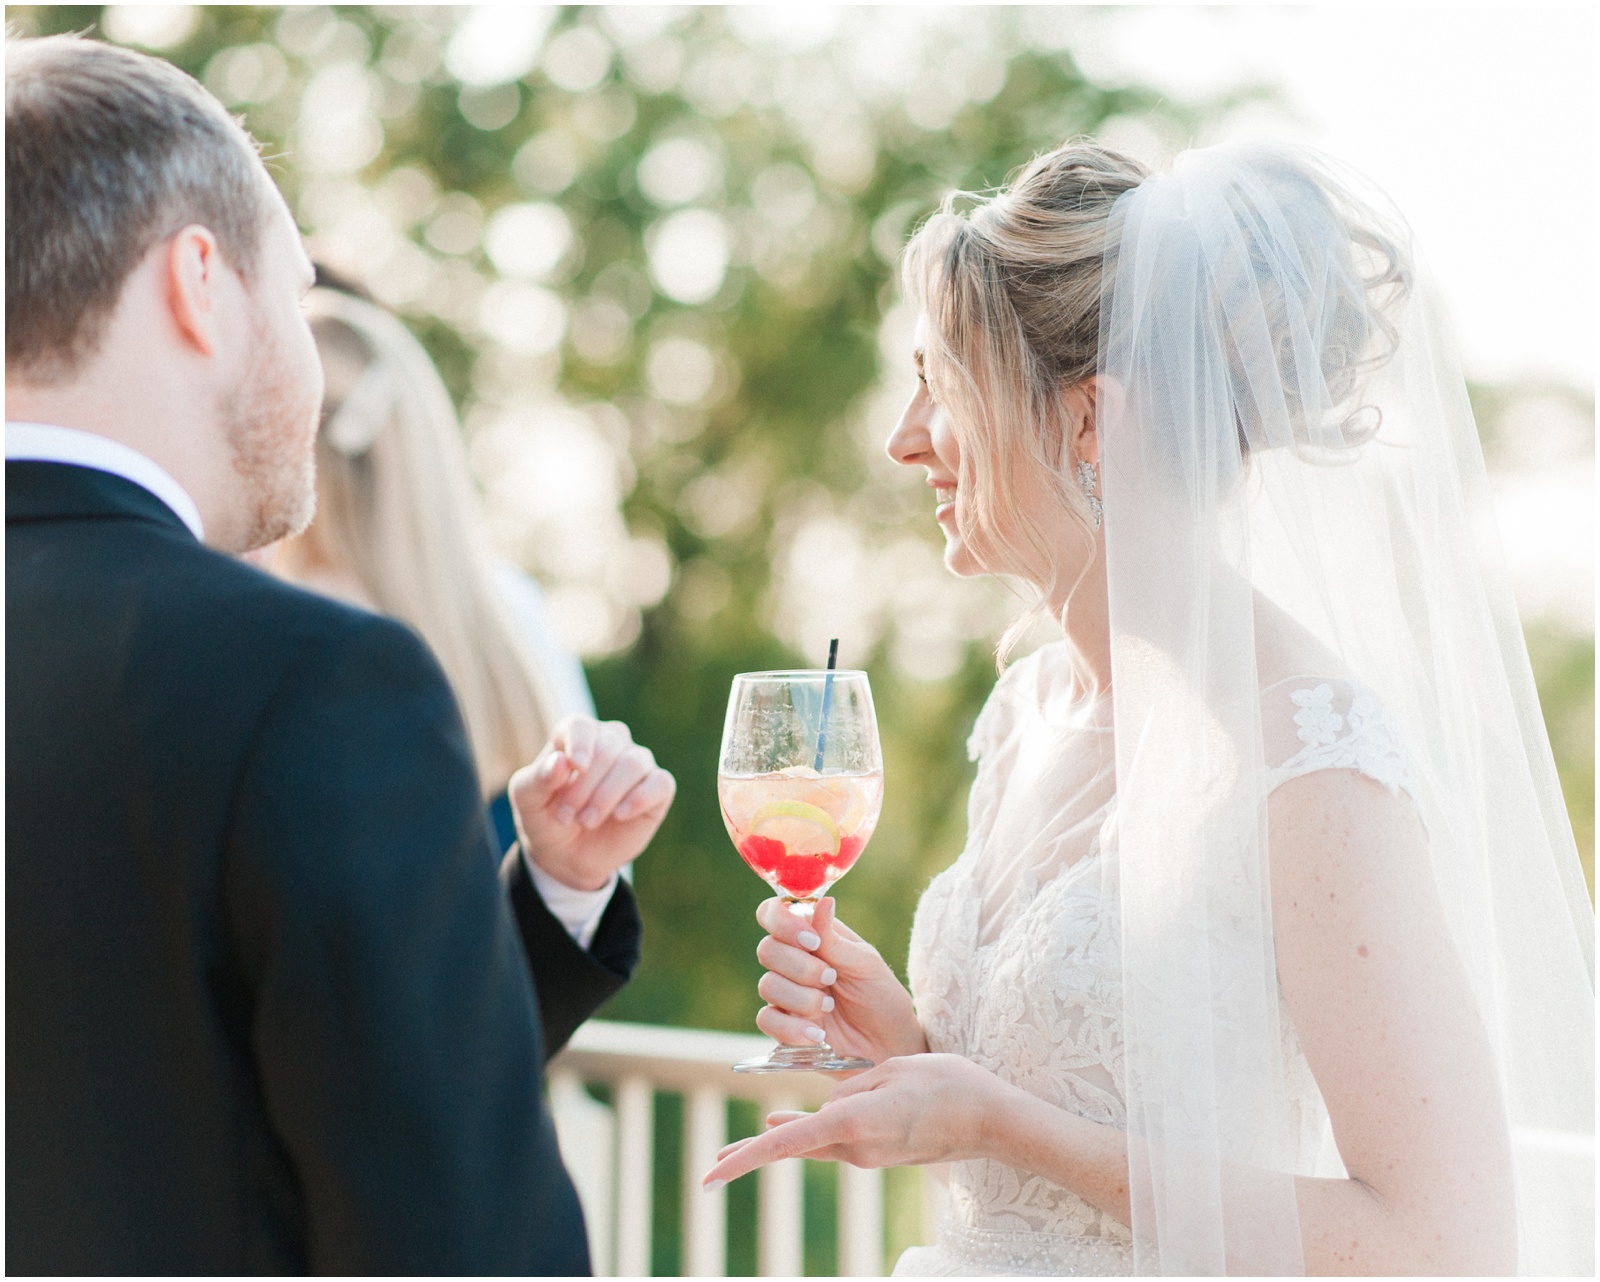 wedding planning tips from a photographer